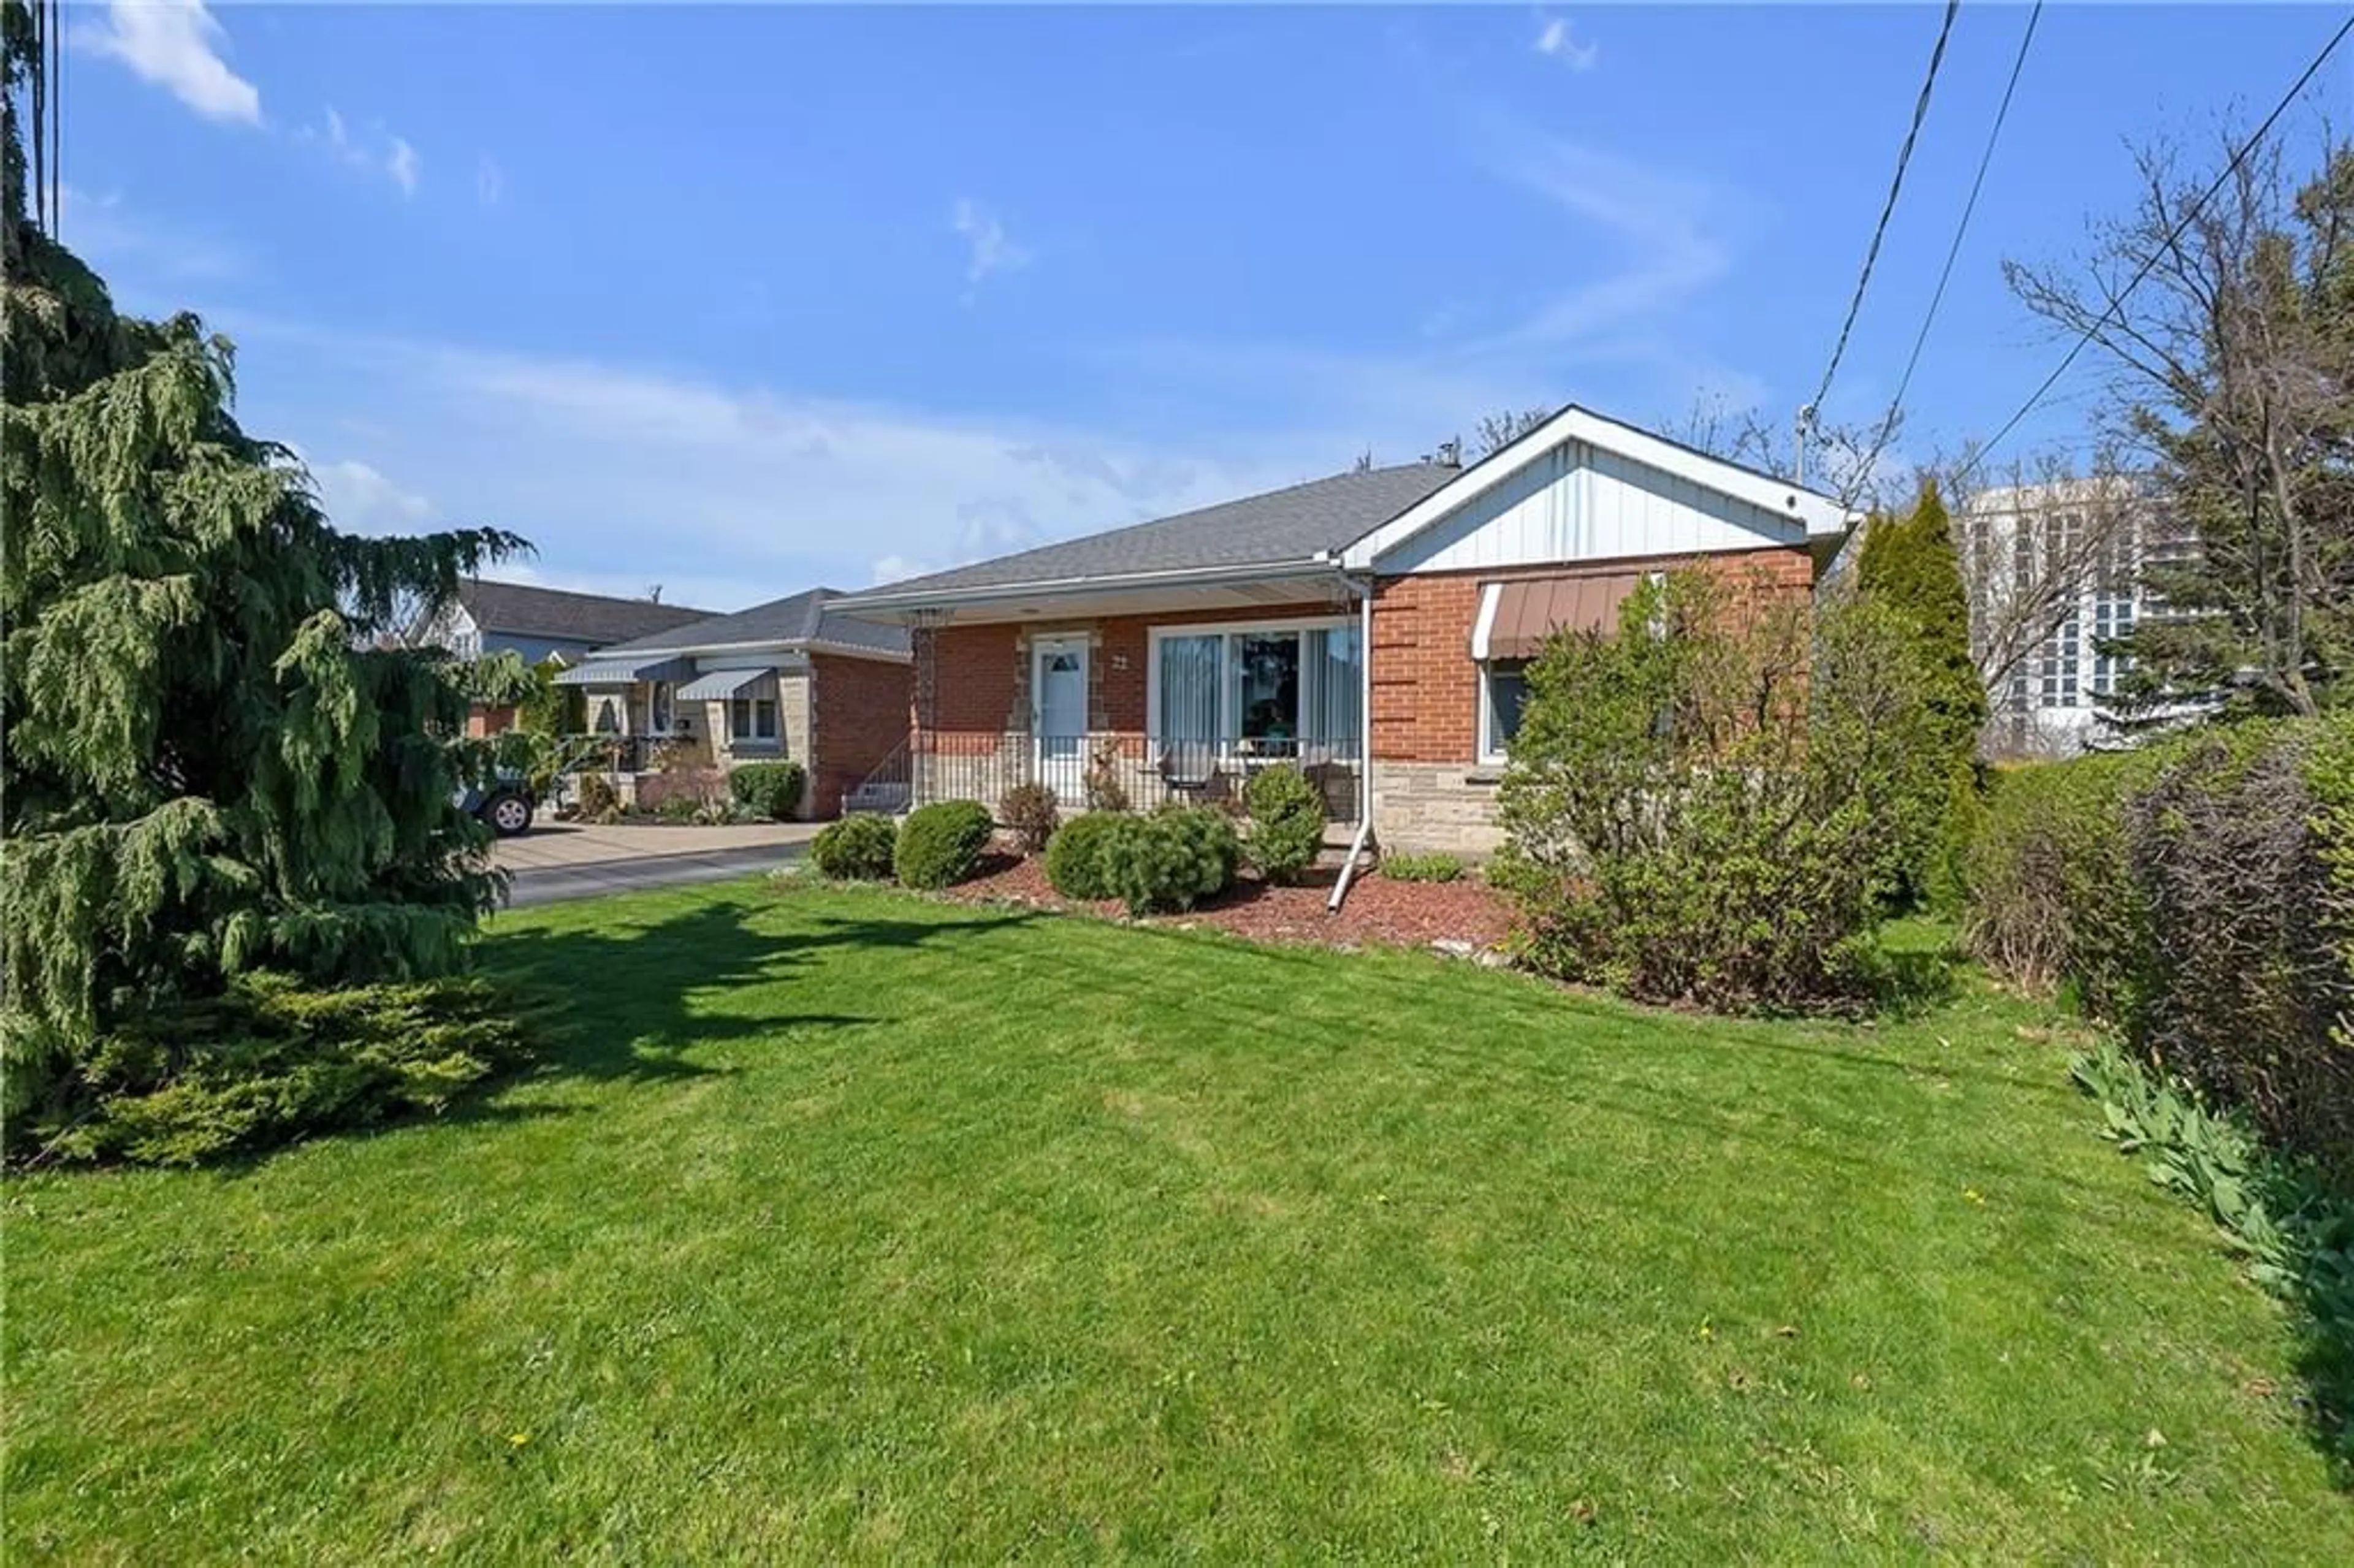 Frontside or backside of a home for 22 Galbraith Dr, Stoney Creek Ontario L8G 1Z8